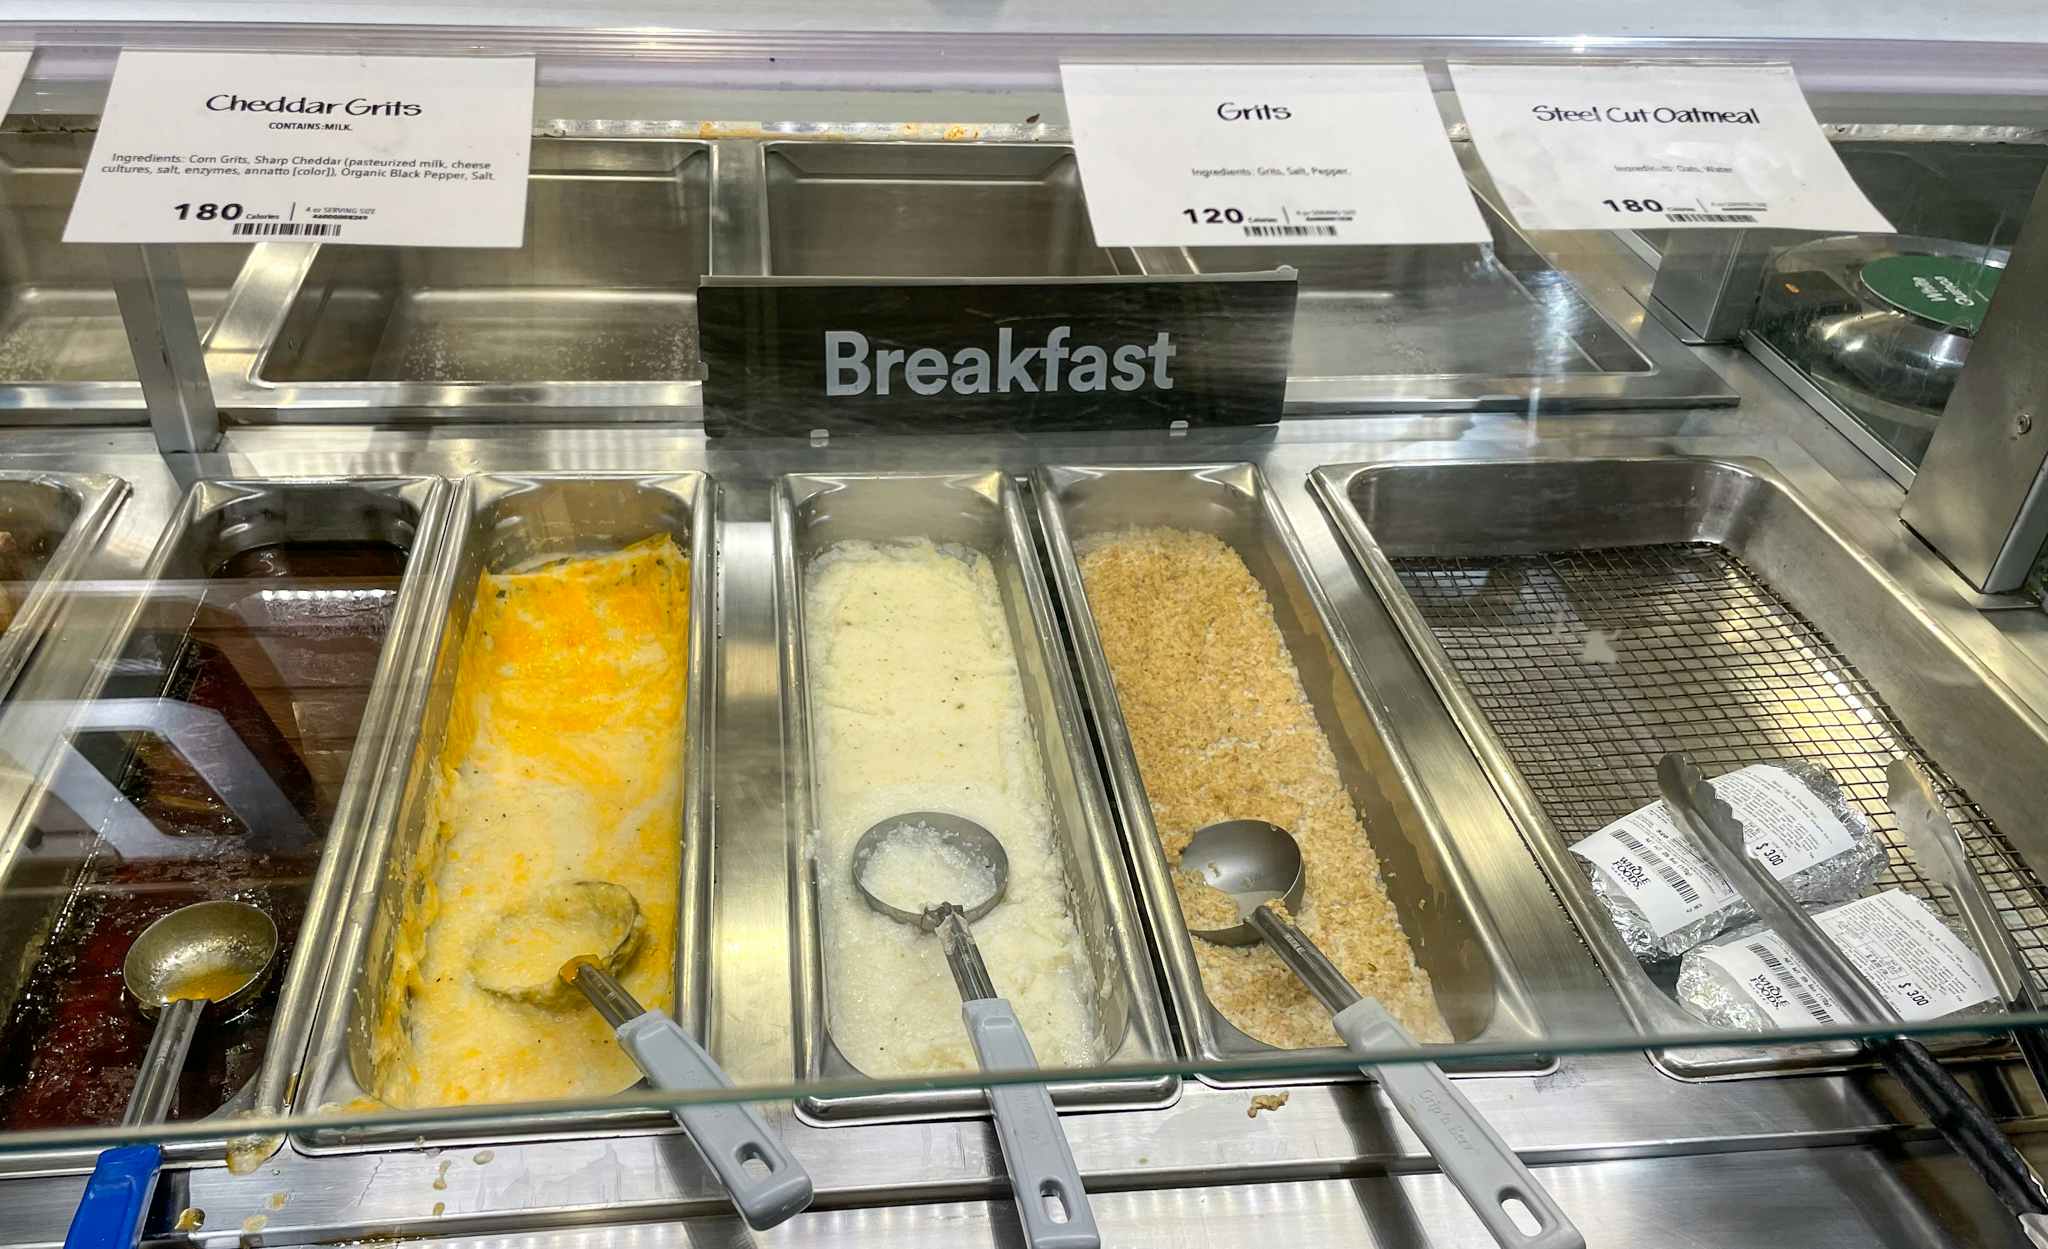 oatmeal grits and syrup in a hot bar at whole foods